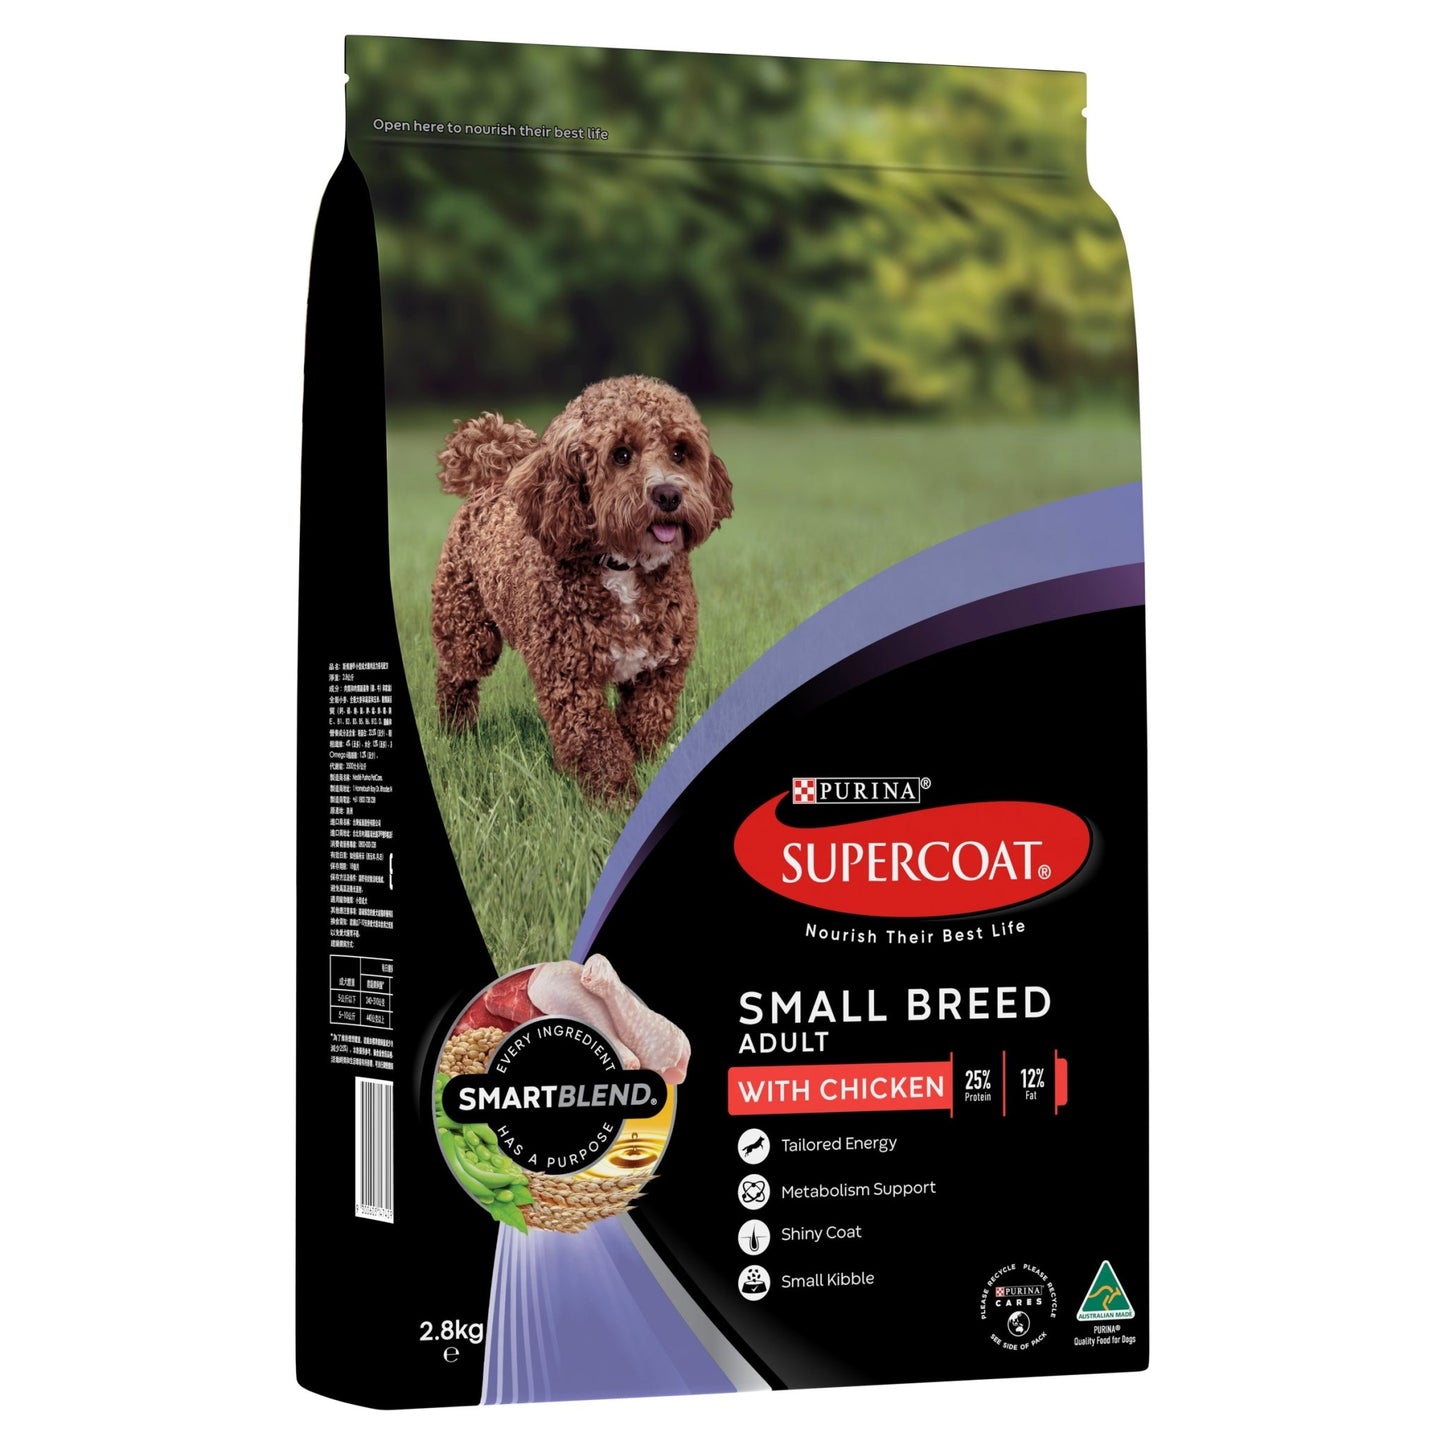 Supercoat Adult Small Breed Chicken 2.8kg Purina - Woonona Petfood & Produce